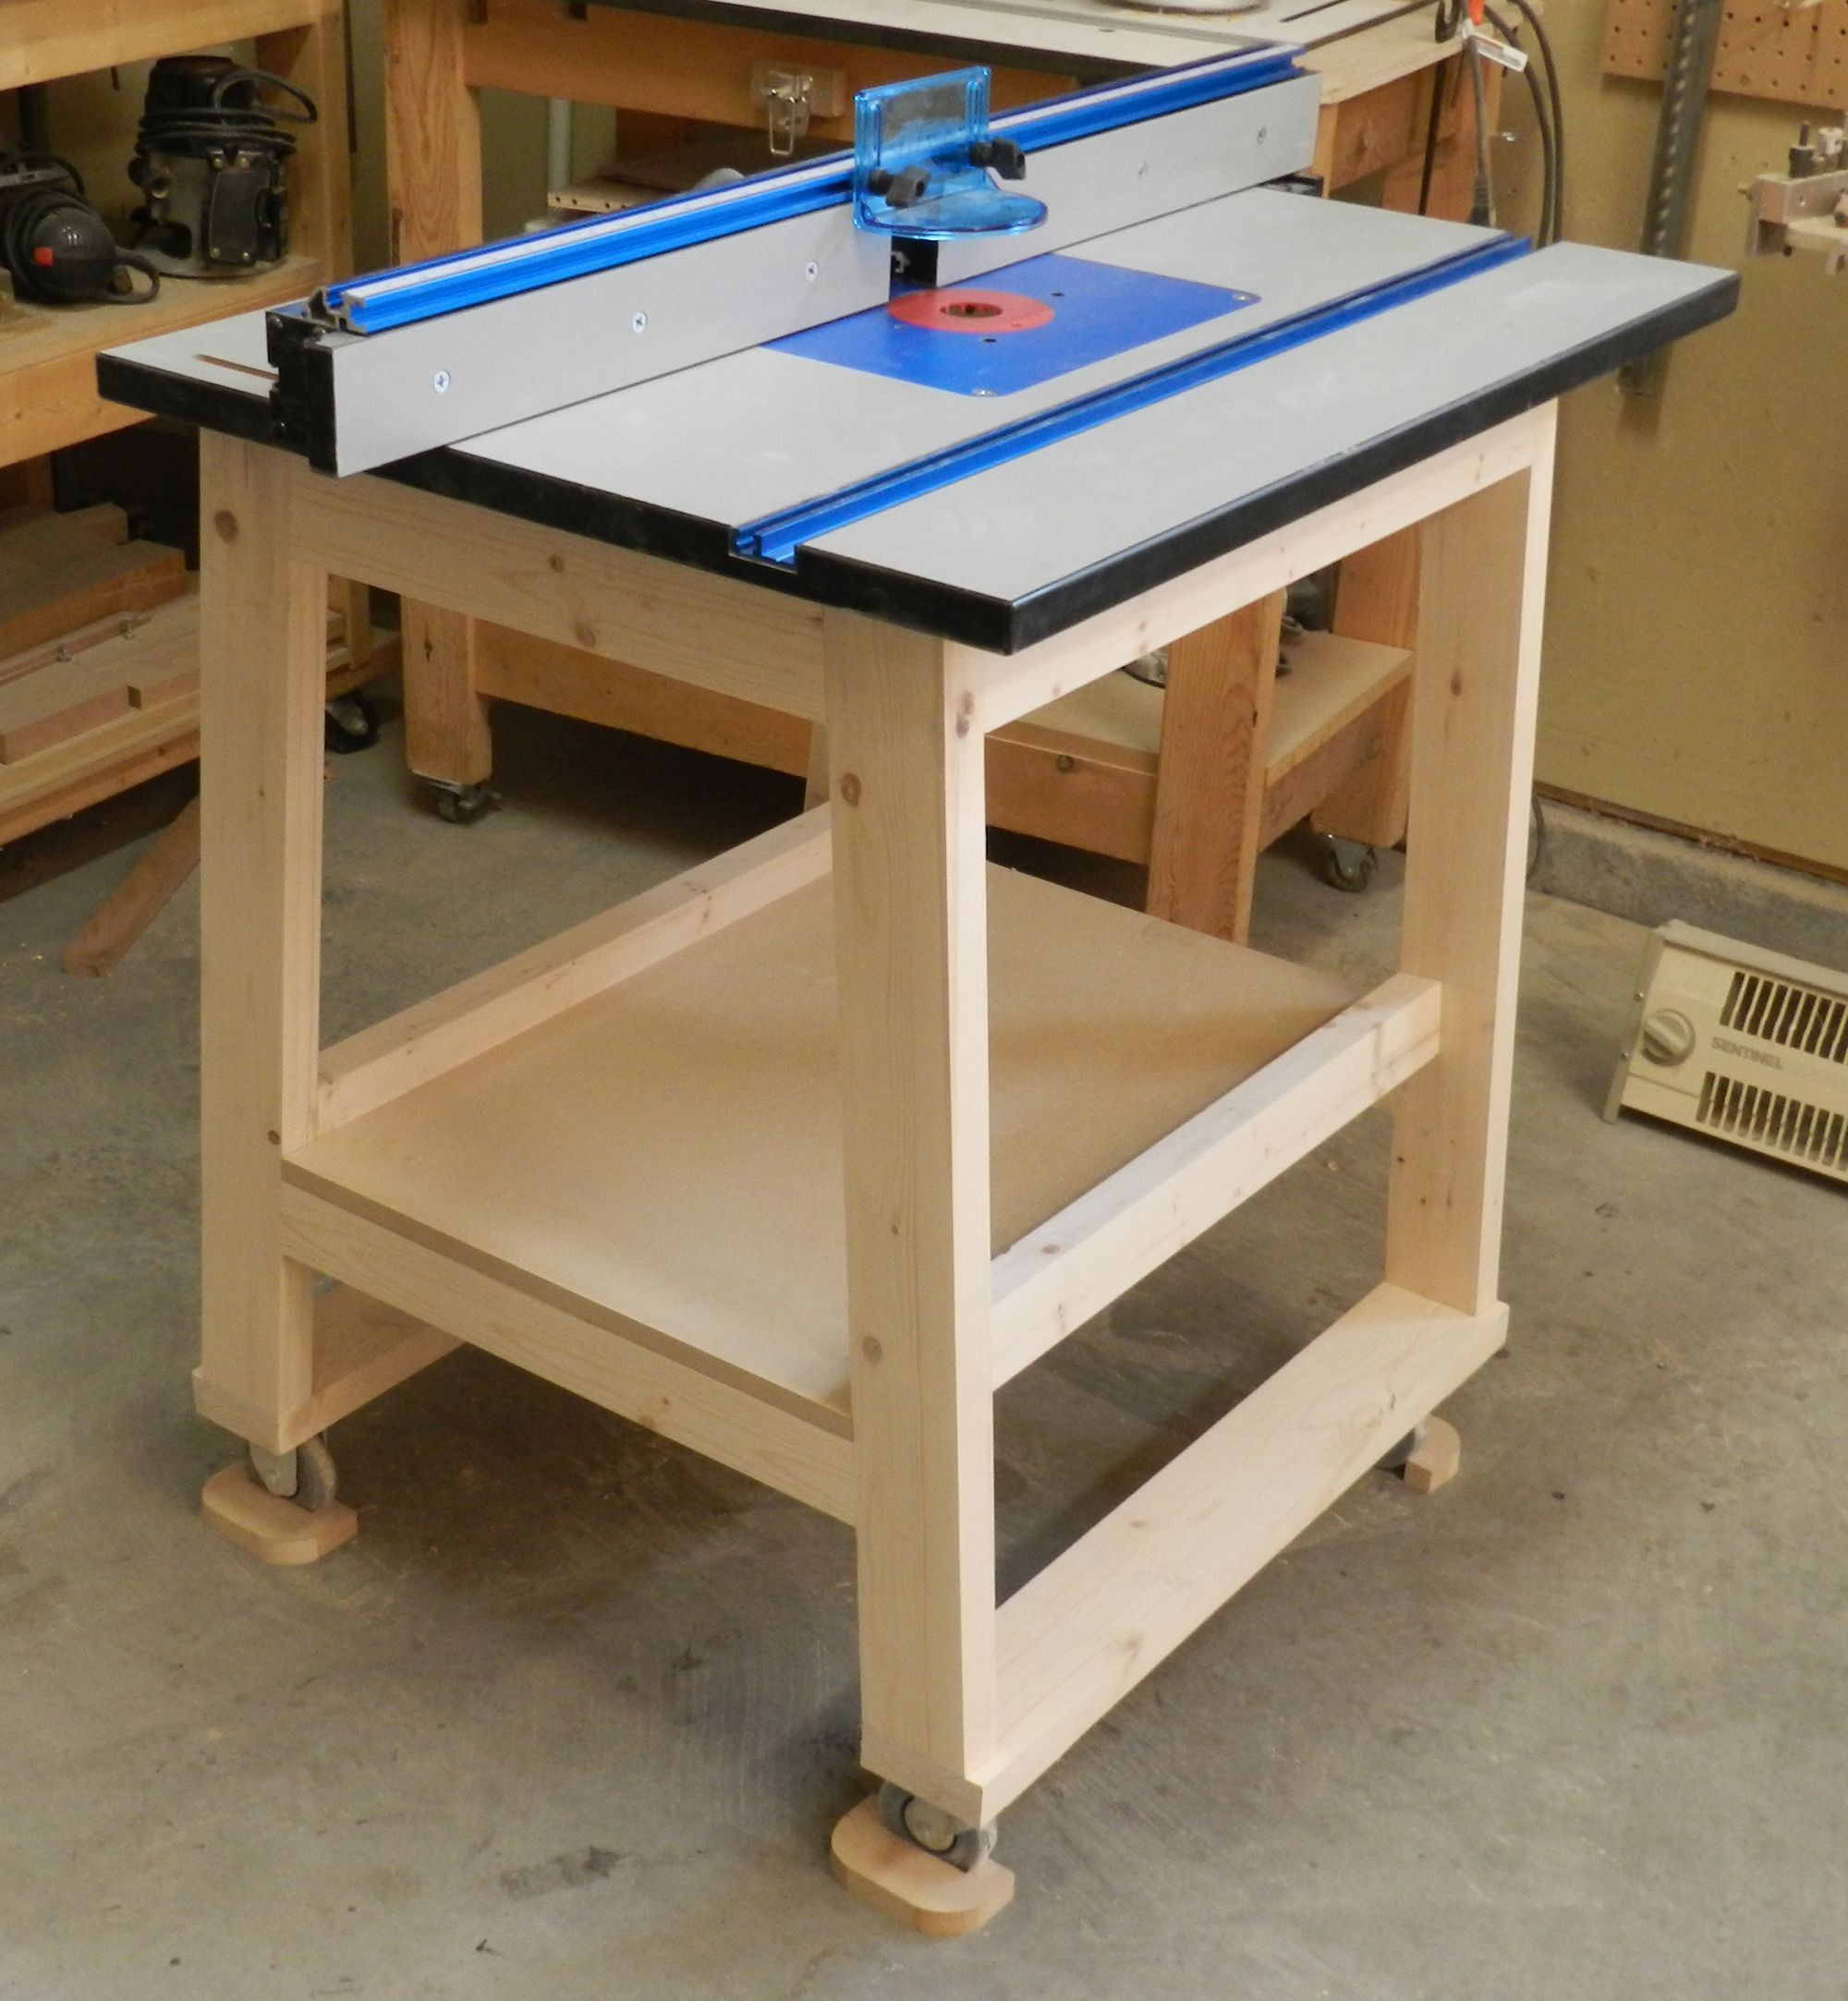 The Best Ideas for Diy Router Table Plans Home, Family, Style and Art